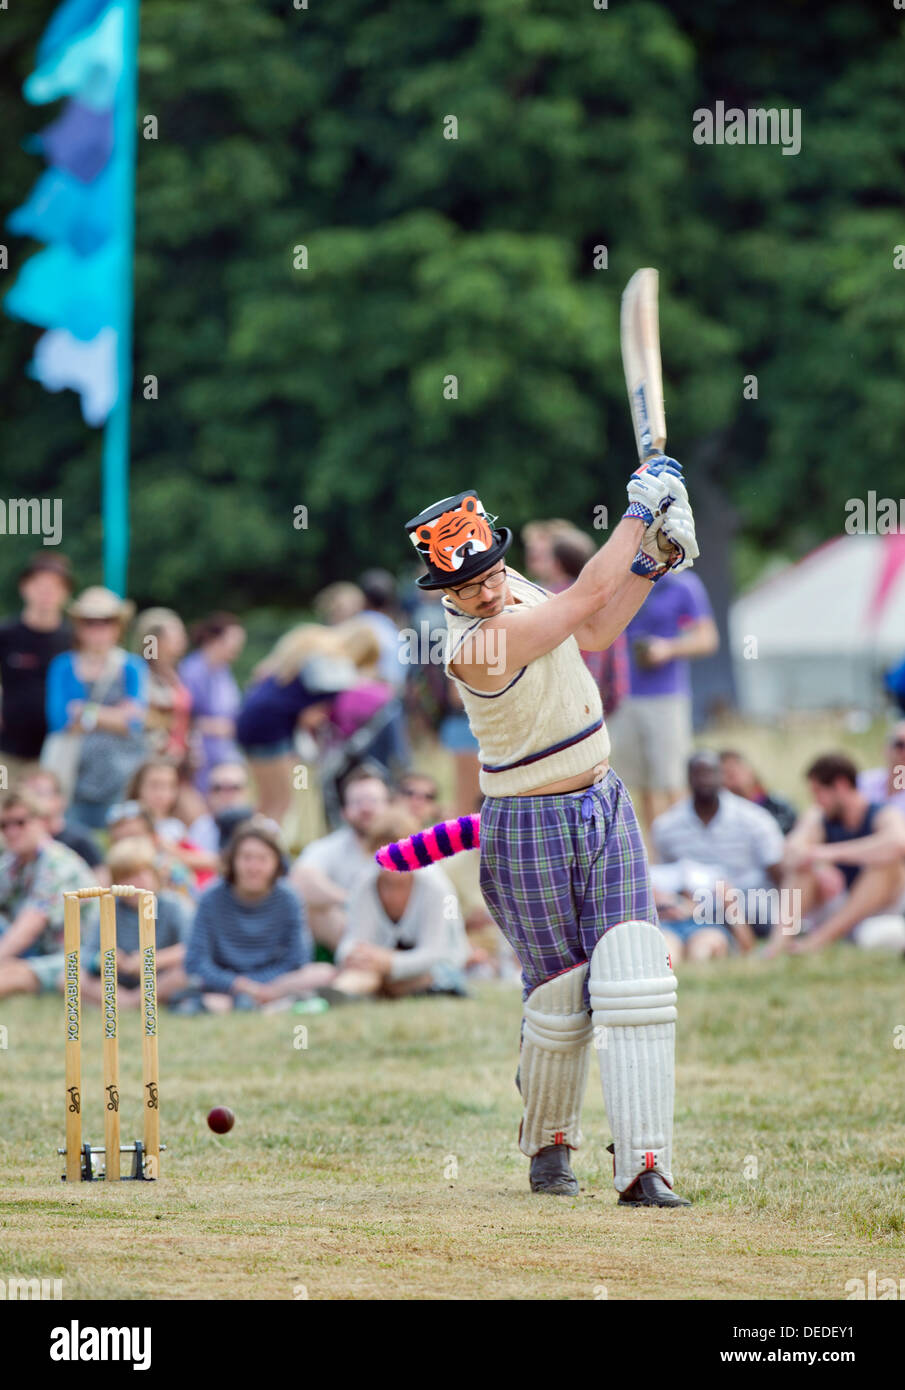 The Wilderness Festival at Cornbury Park, Oxfordshire (10 Aug 2013). - The Wilderness Urn light hearted cricket match. Stock Photo